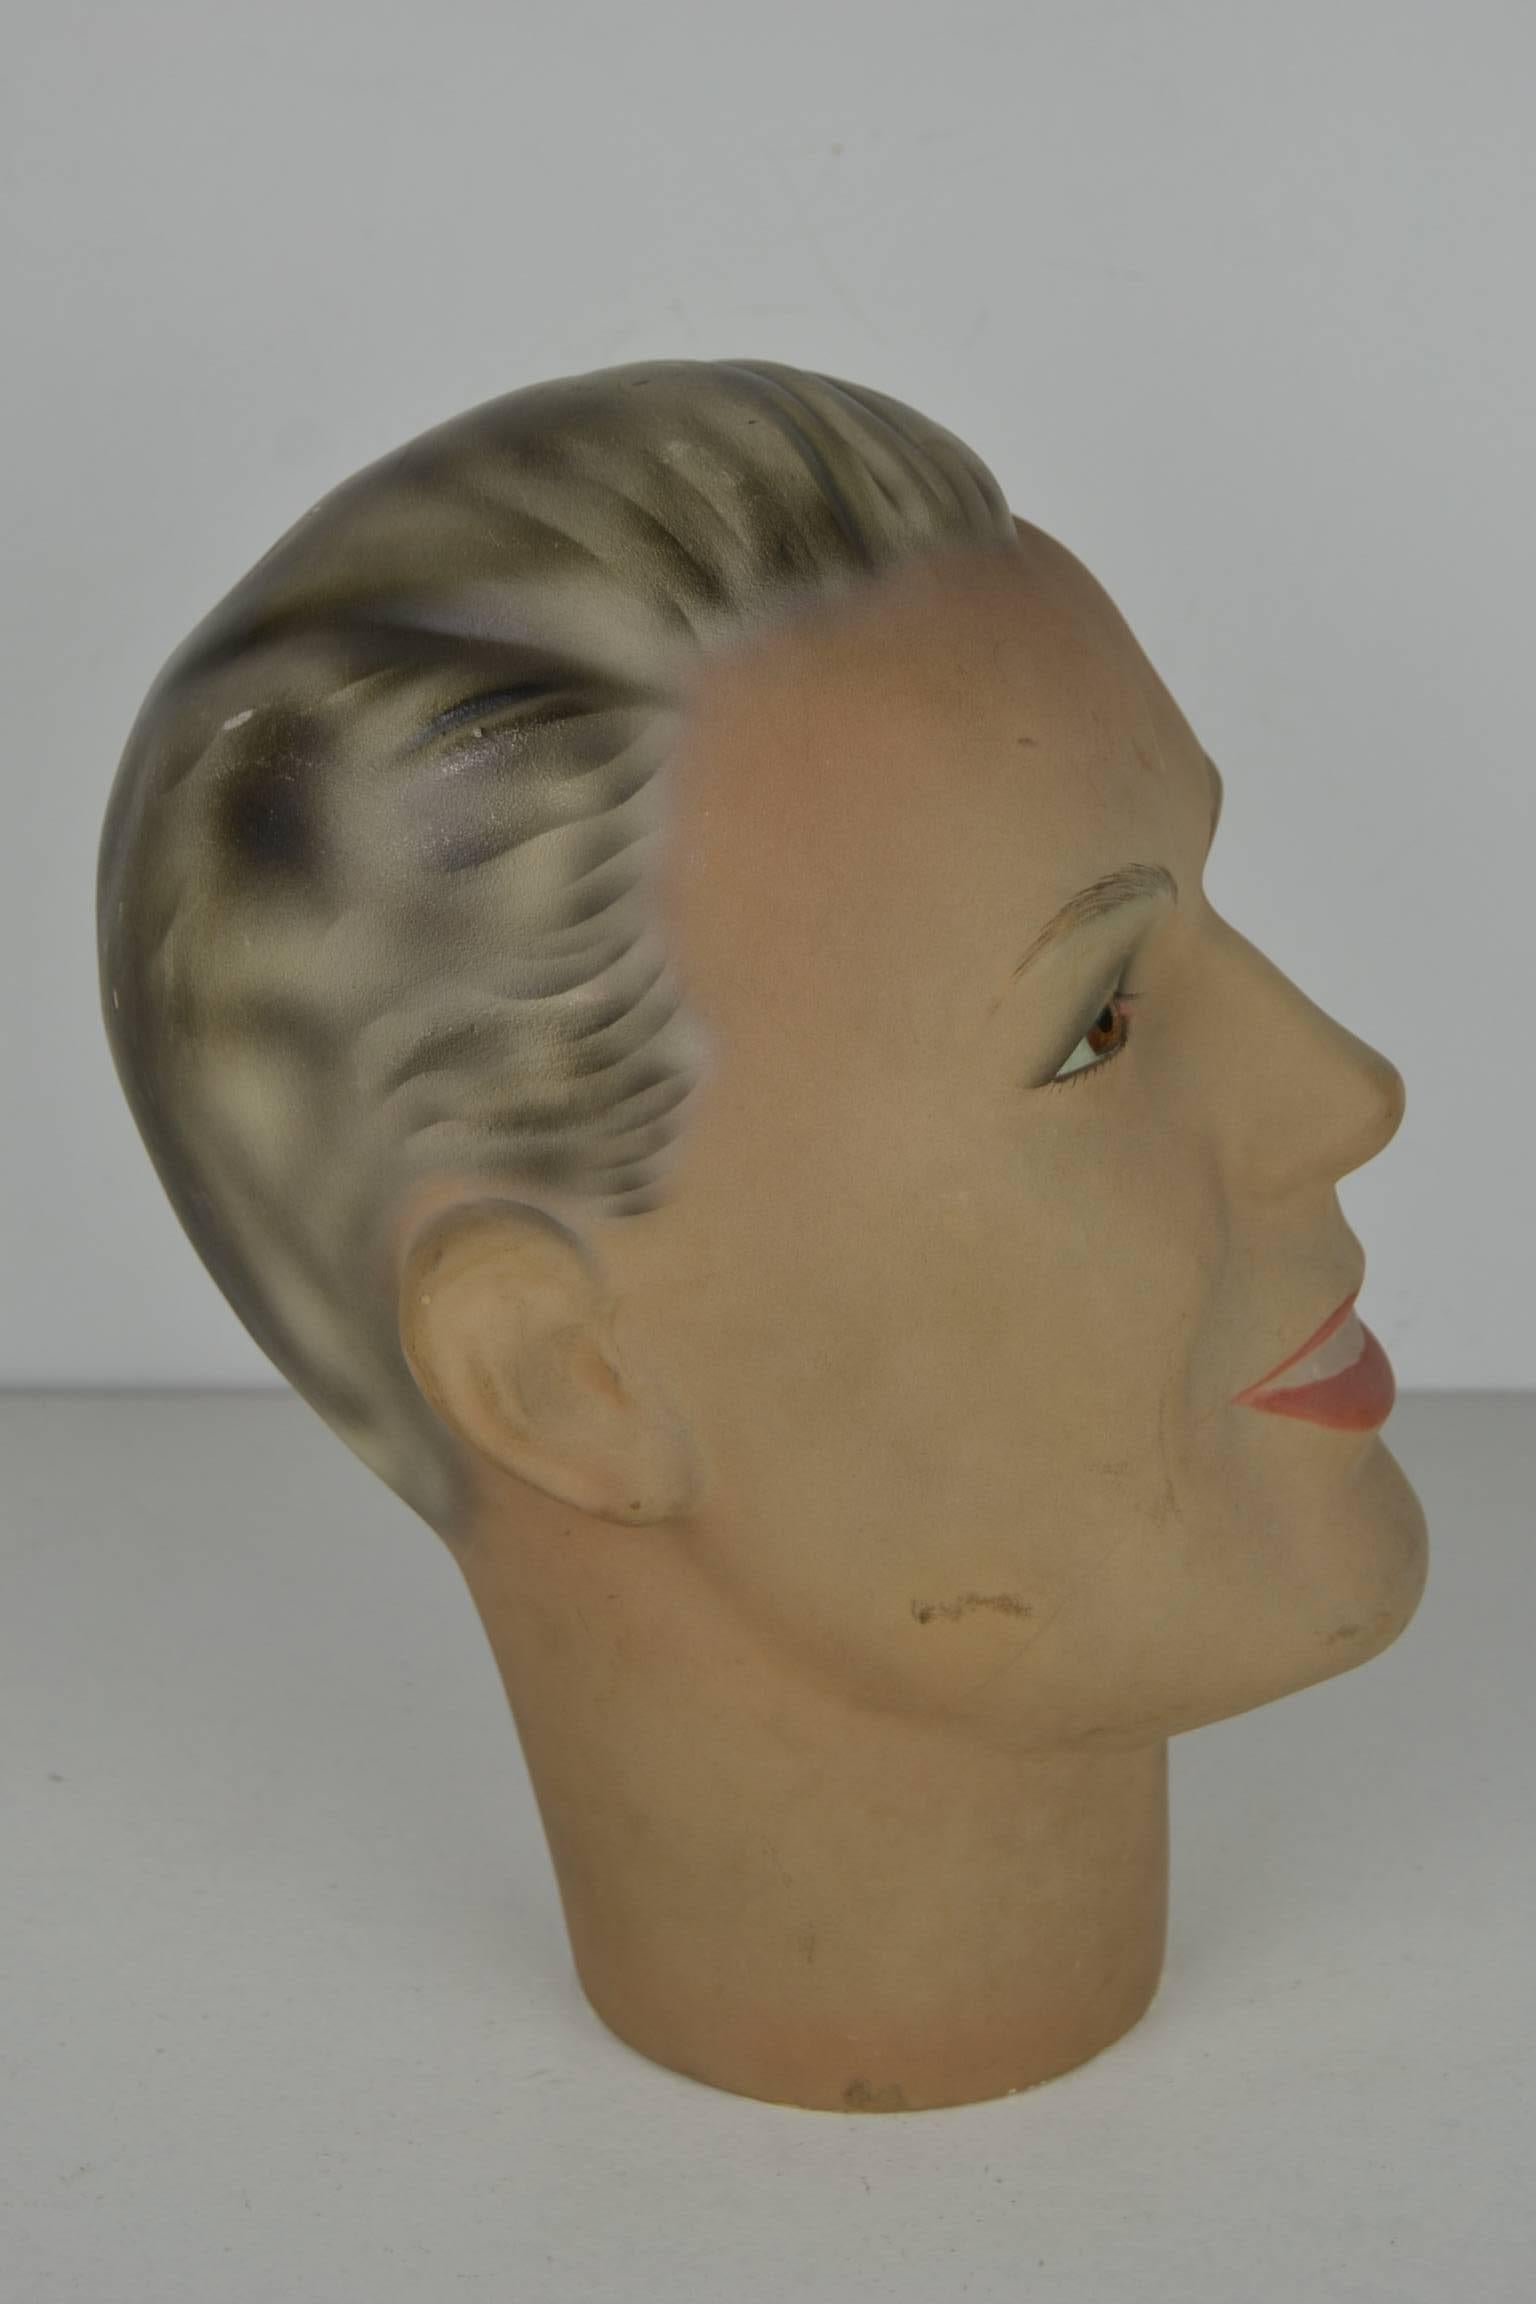 Vintage lifesize plaster male mannequin head with modeled hair and real glass eyes. He has a lovely smile on his face that makes him very charming.
Dates from the Art Deco period - 1920s - 1930s - not signed - probably French.
Still in very good